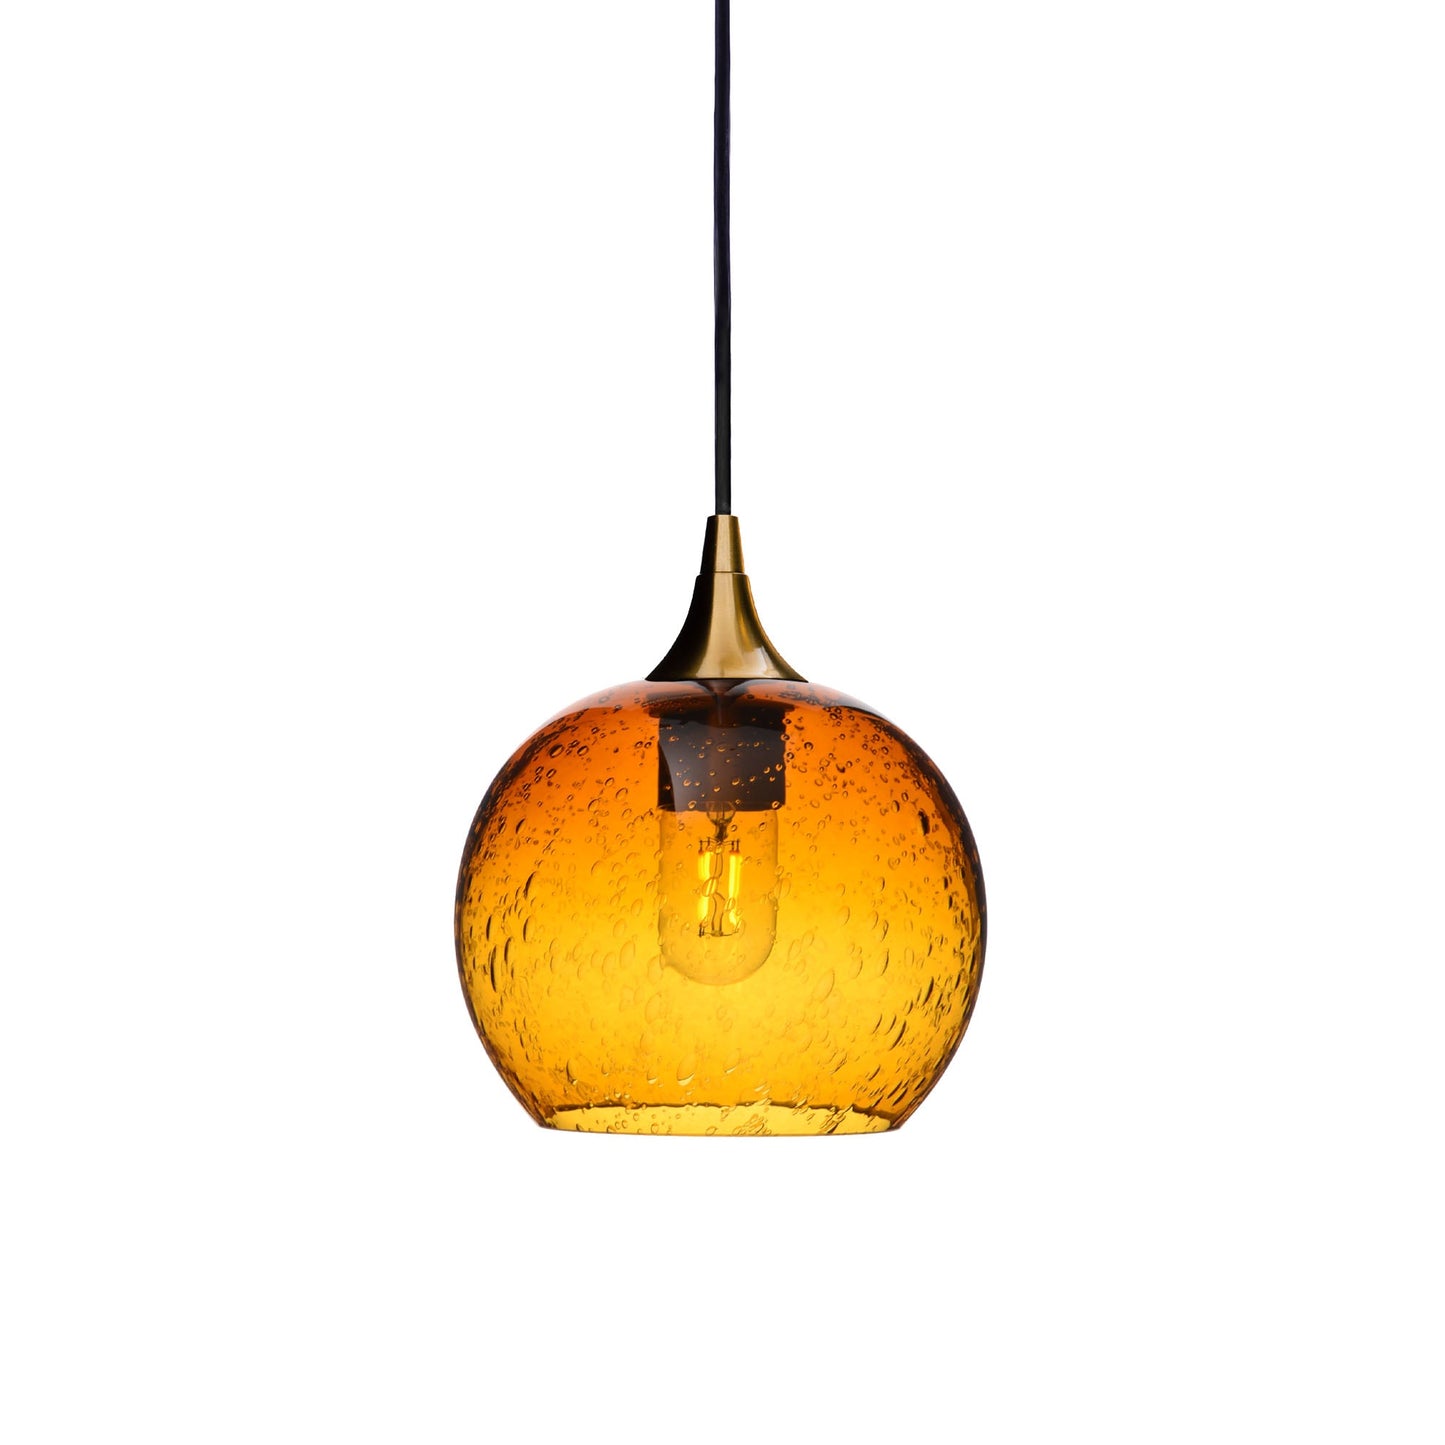 767 Lunar: Single Pendant Light-Glass-Bicycle Glass Co - Hotshop-Harvest Gold-Polished Brass-Bicycle Glass Co